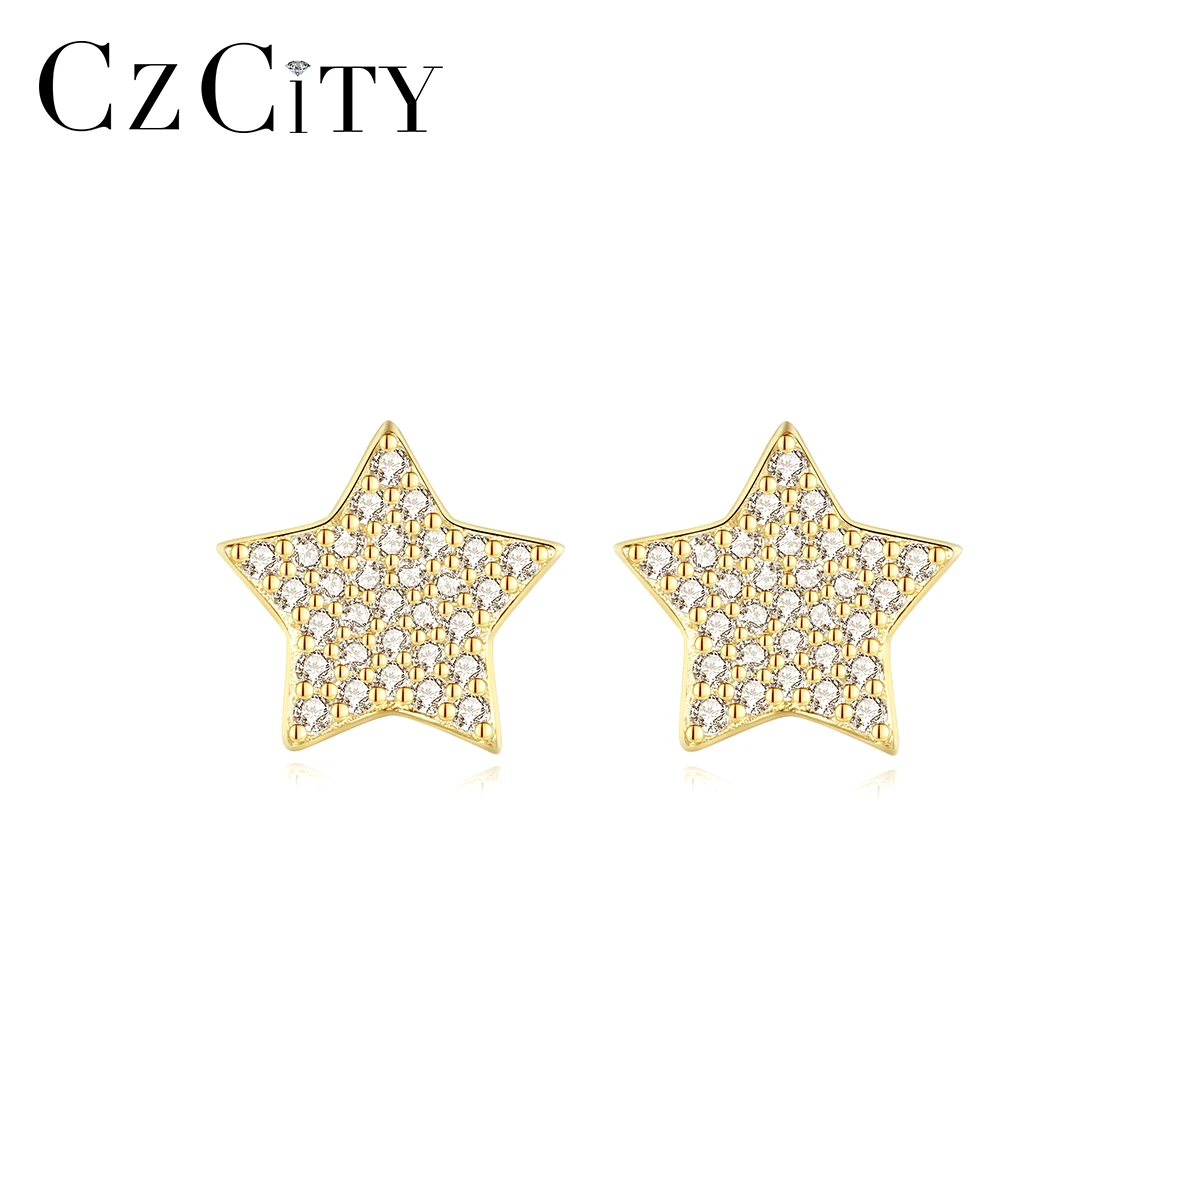 

CZCITY New Fashion Full CZ Star Stud Earrings for Women 925 Sterling Silver Fine Jewelry Bijoux Femme Pendientes Christmas Gifts